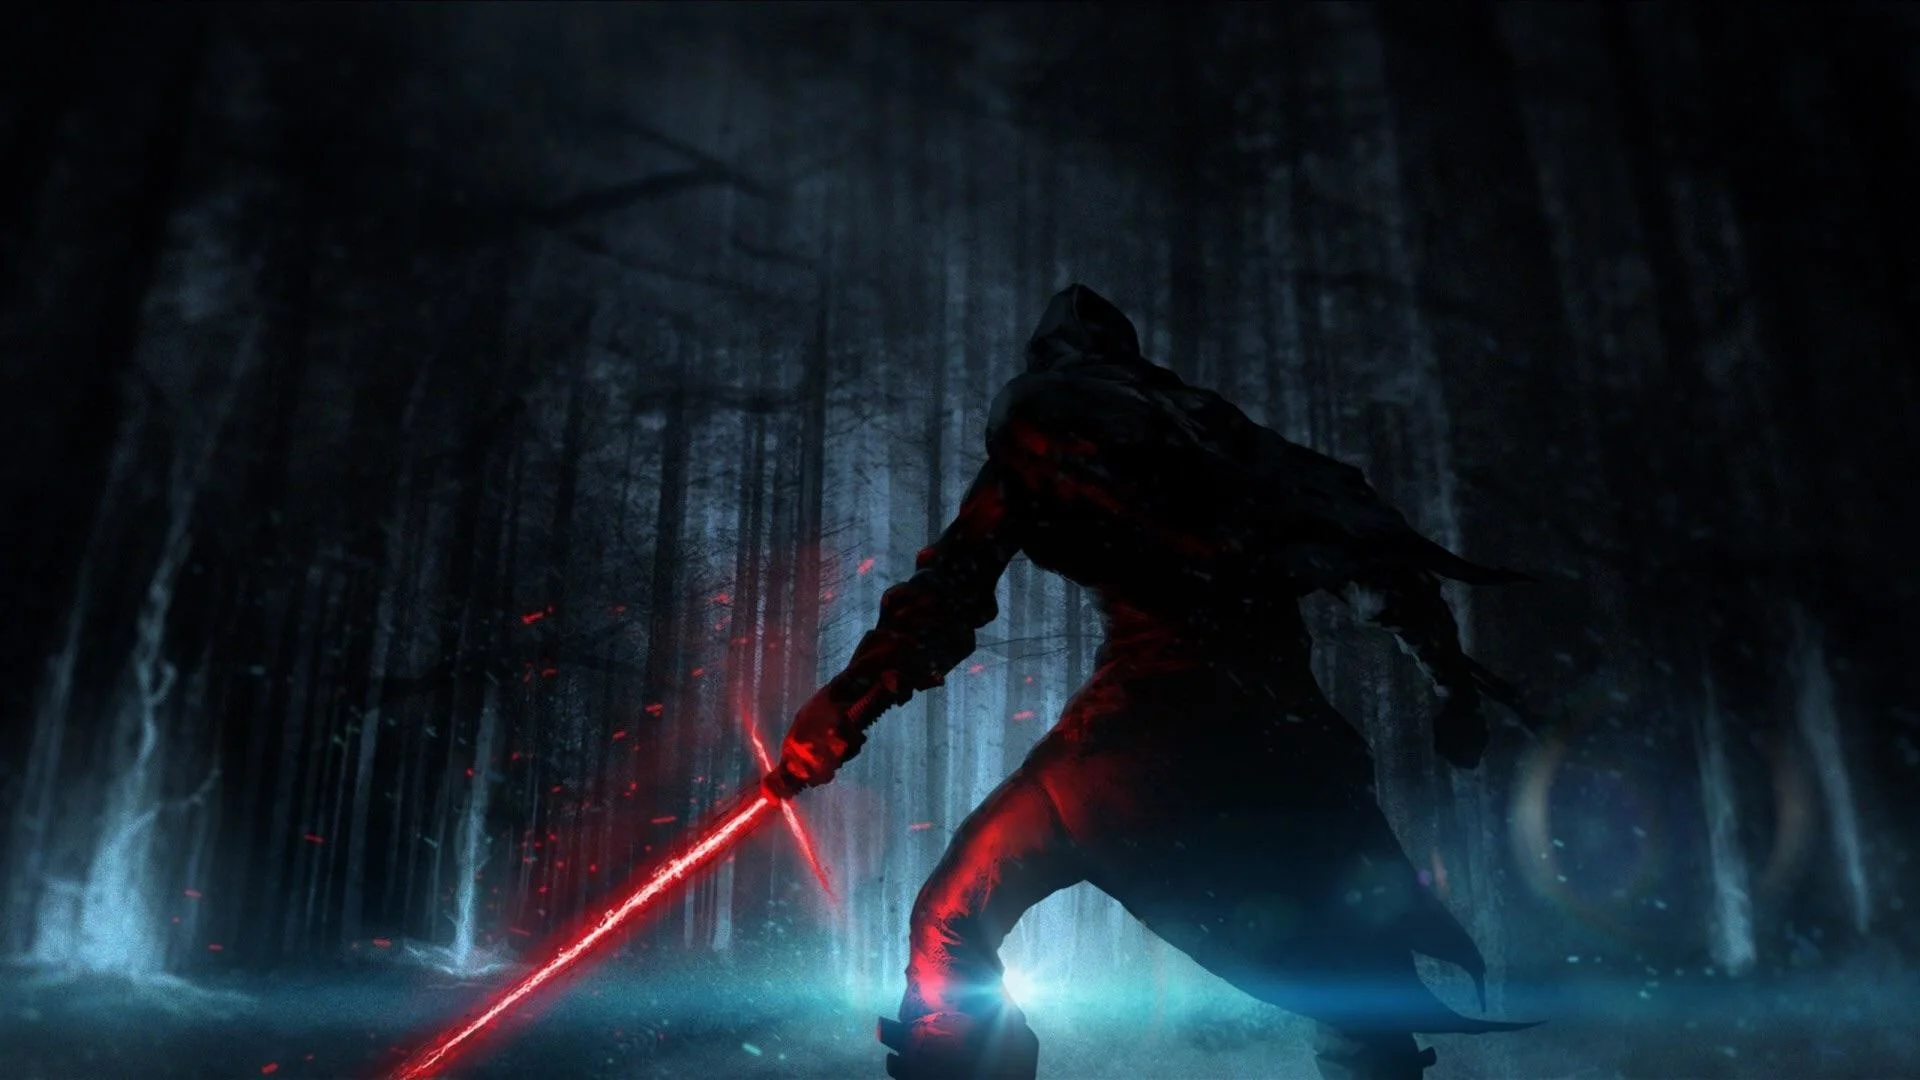 Kylo Ren [1920×1080] Need #iPhone #6S #Plus #Wallpaper/ #Background for  #IPhone6SPlus? Follow iPhone 6S Plus 3Wallpapers/ #Backgrounds Must to Have…